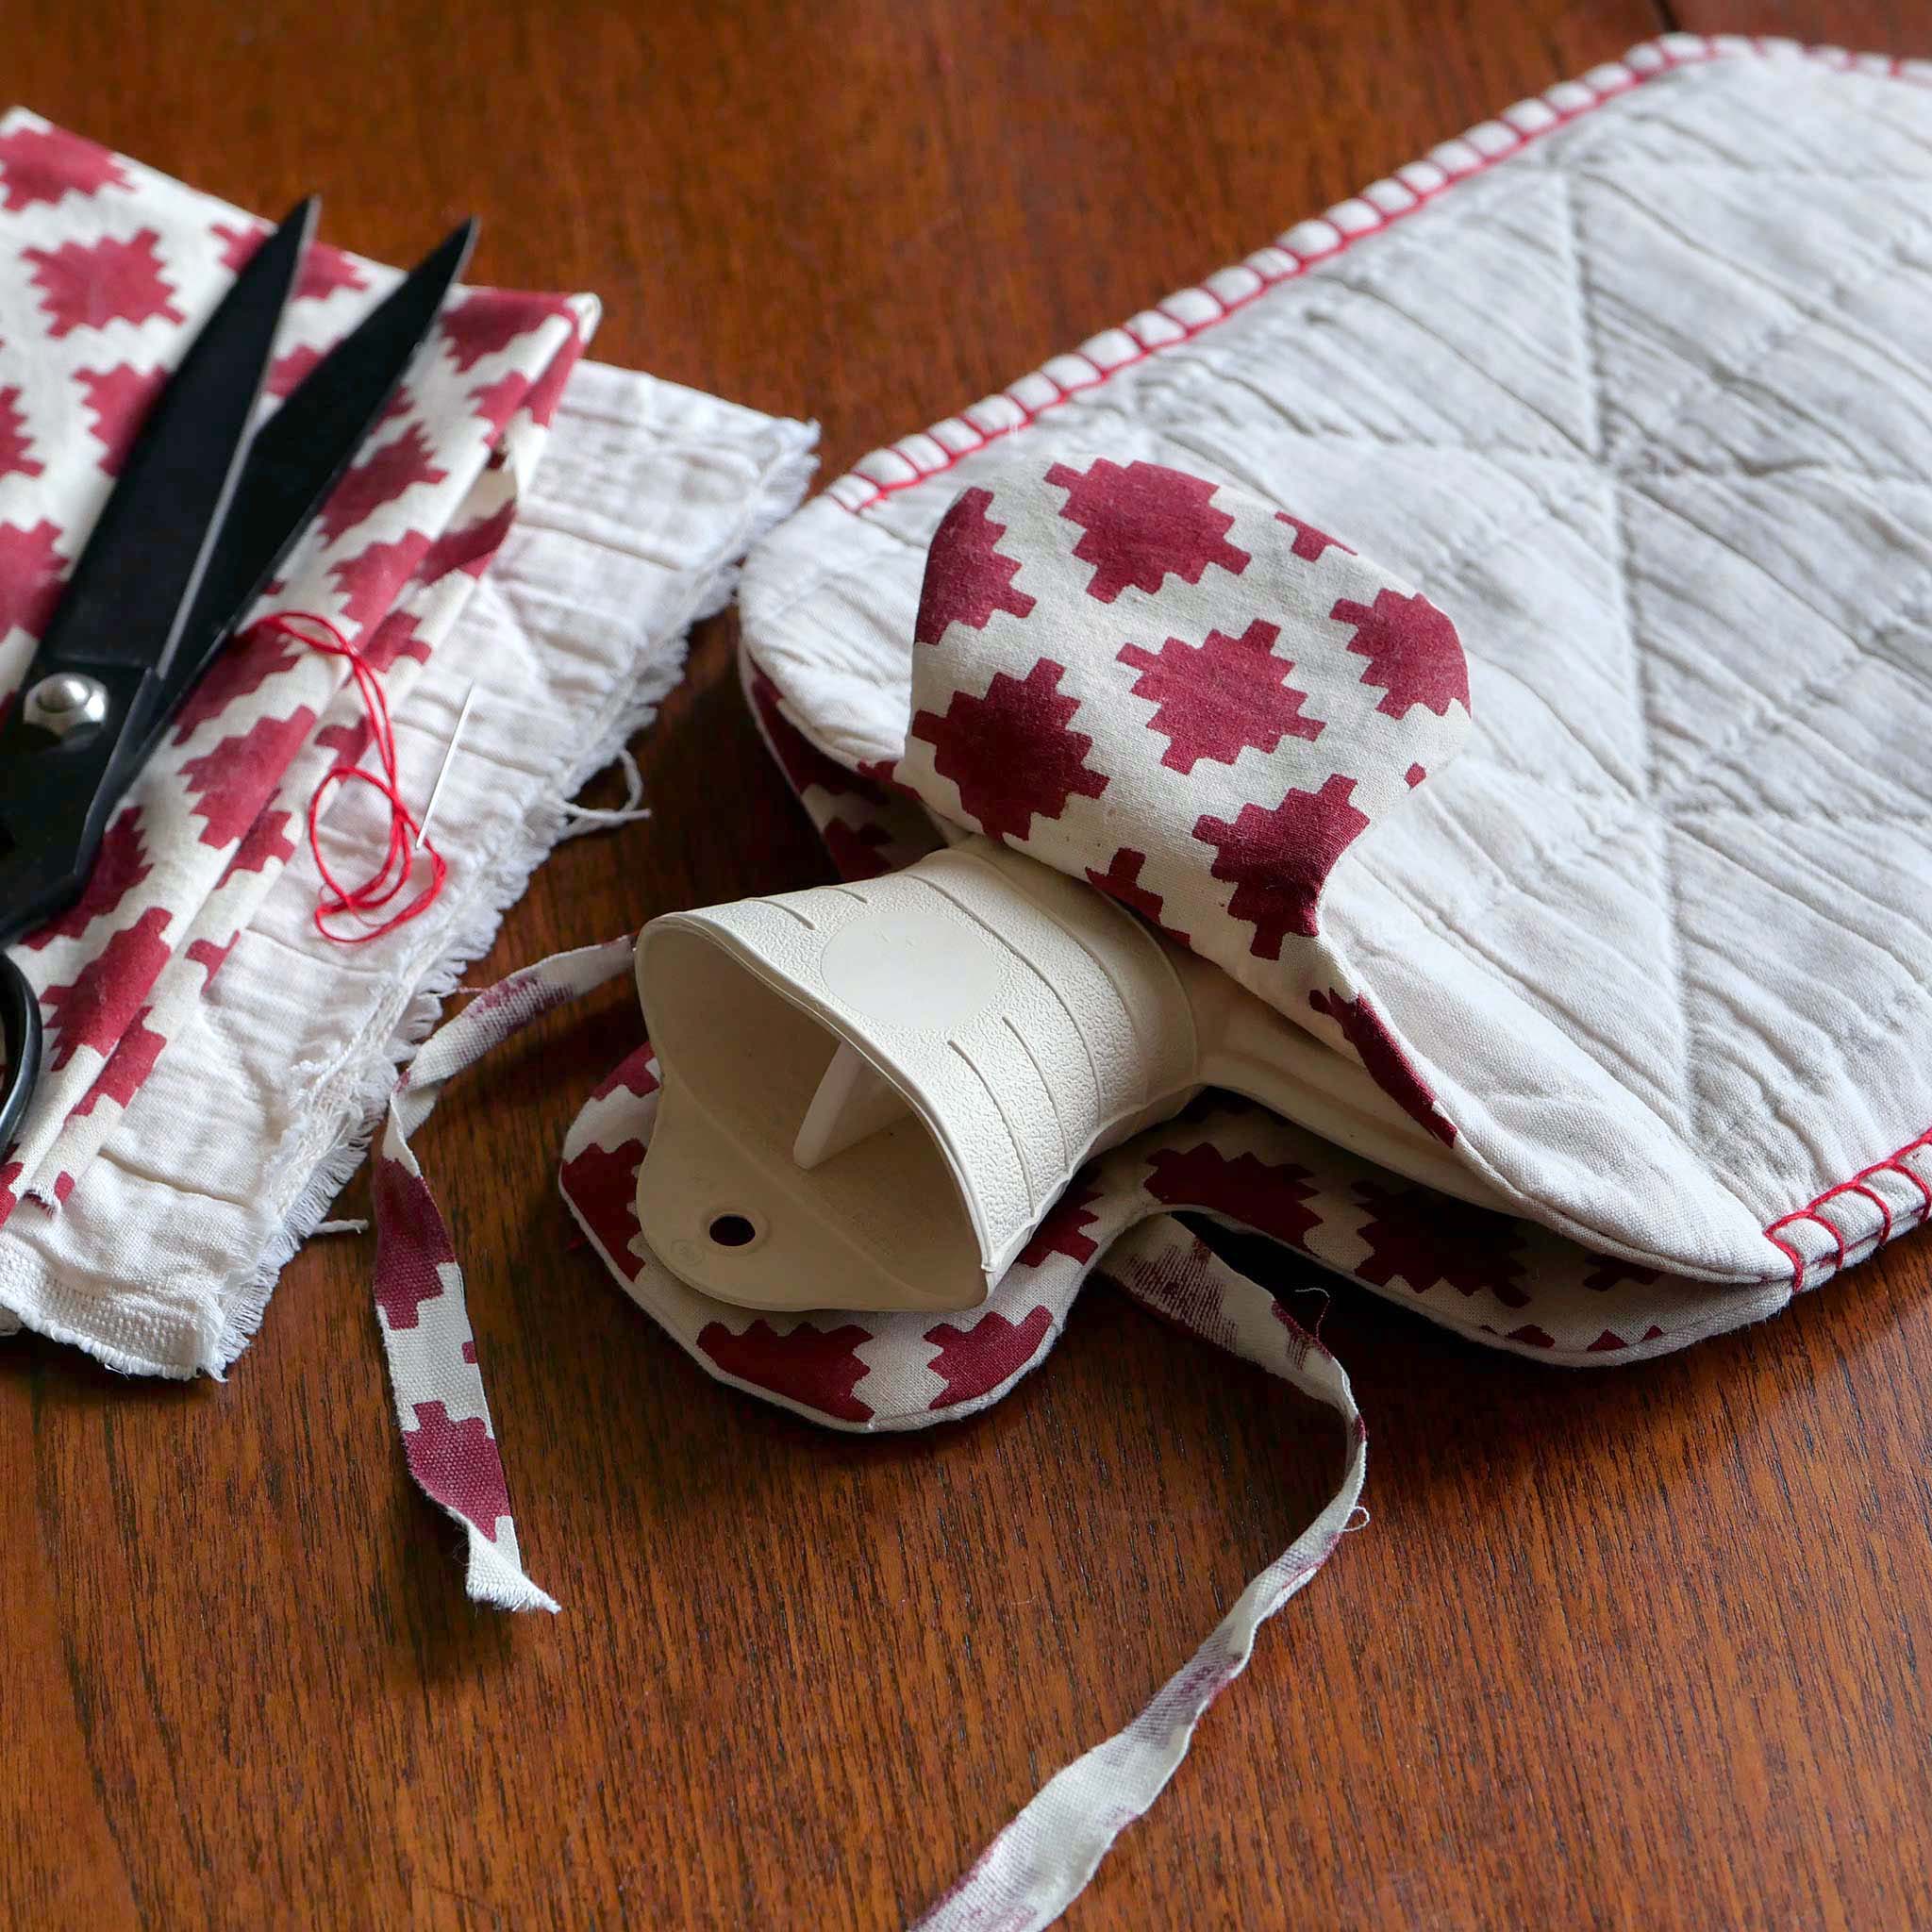 Sewing Guide - How to Make Your Own Hot Water Bottle Cover • Cloth House